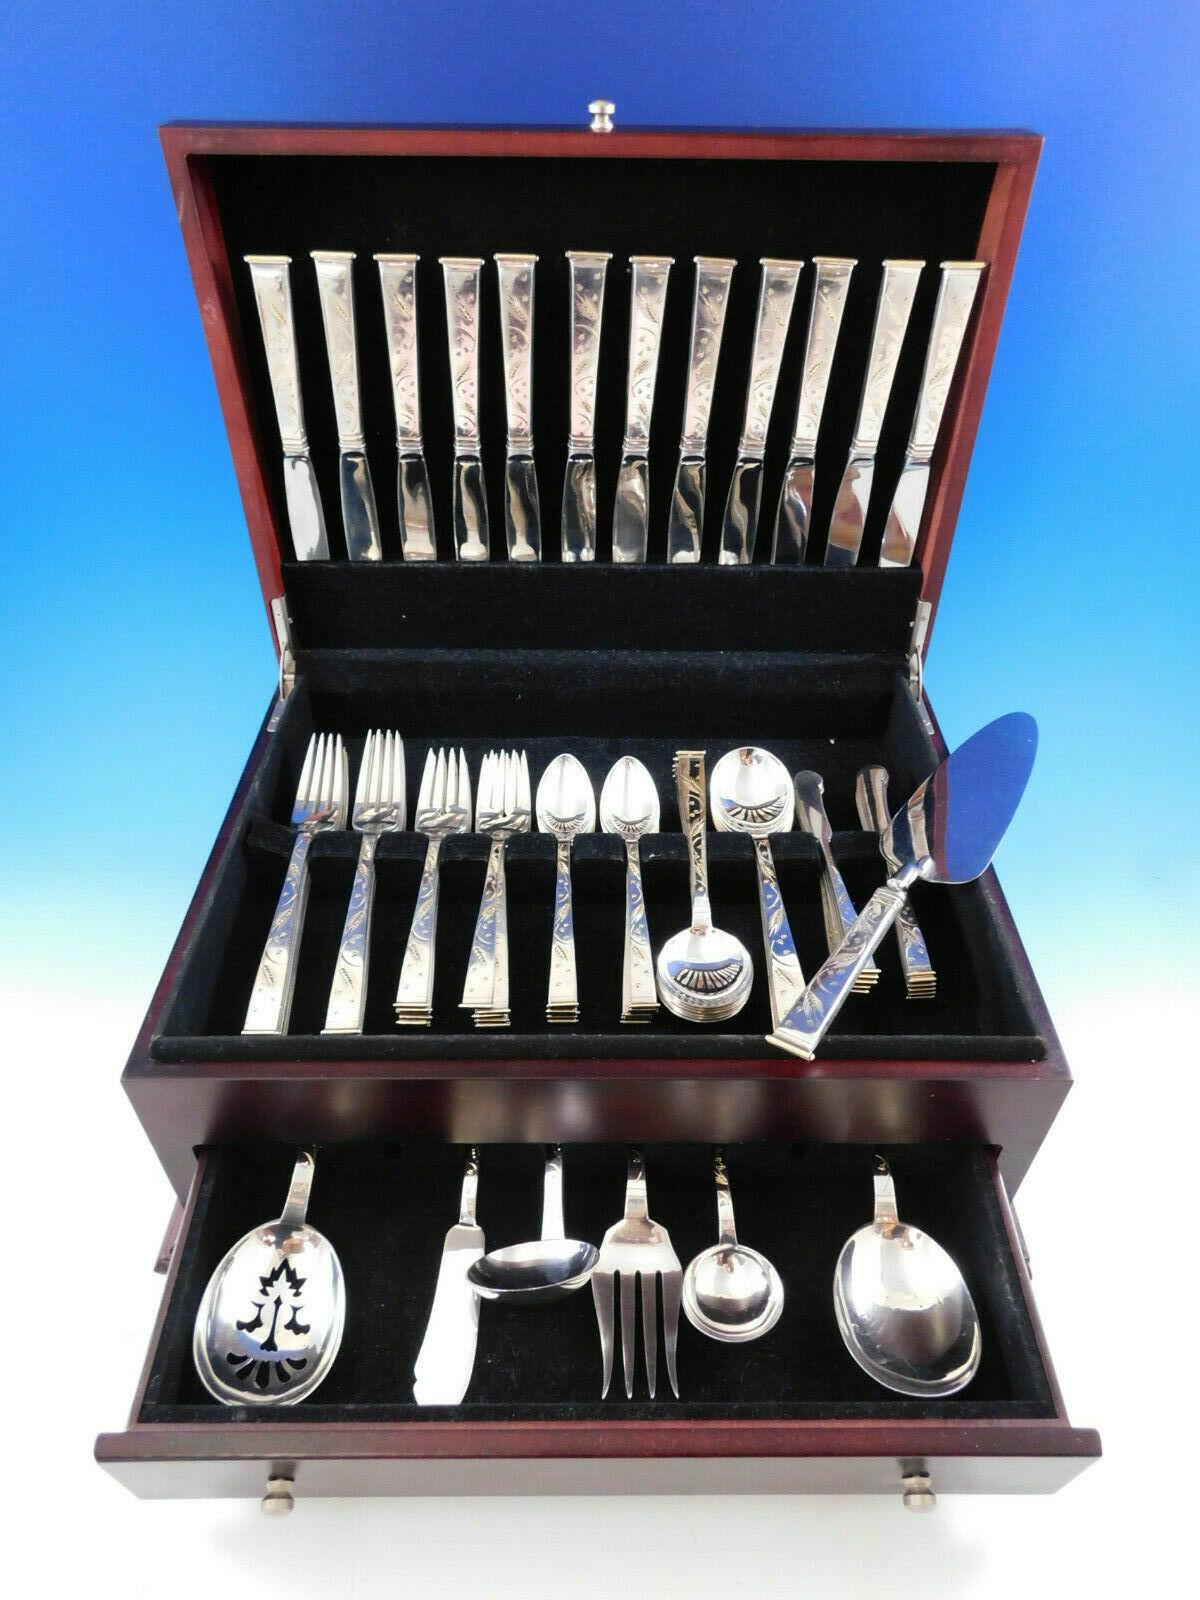 Golden wheat by Miyata Japanese 950 silver flatware set - 79 pieces. This set is 950 silver with 18-karat gold highlights on the wheat and the end of the handle. This set includes:

12 knives, 8 3/4